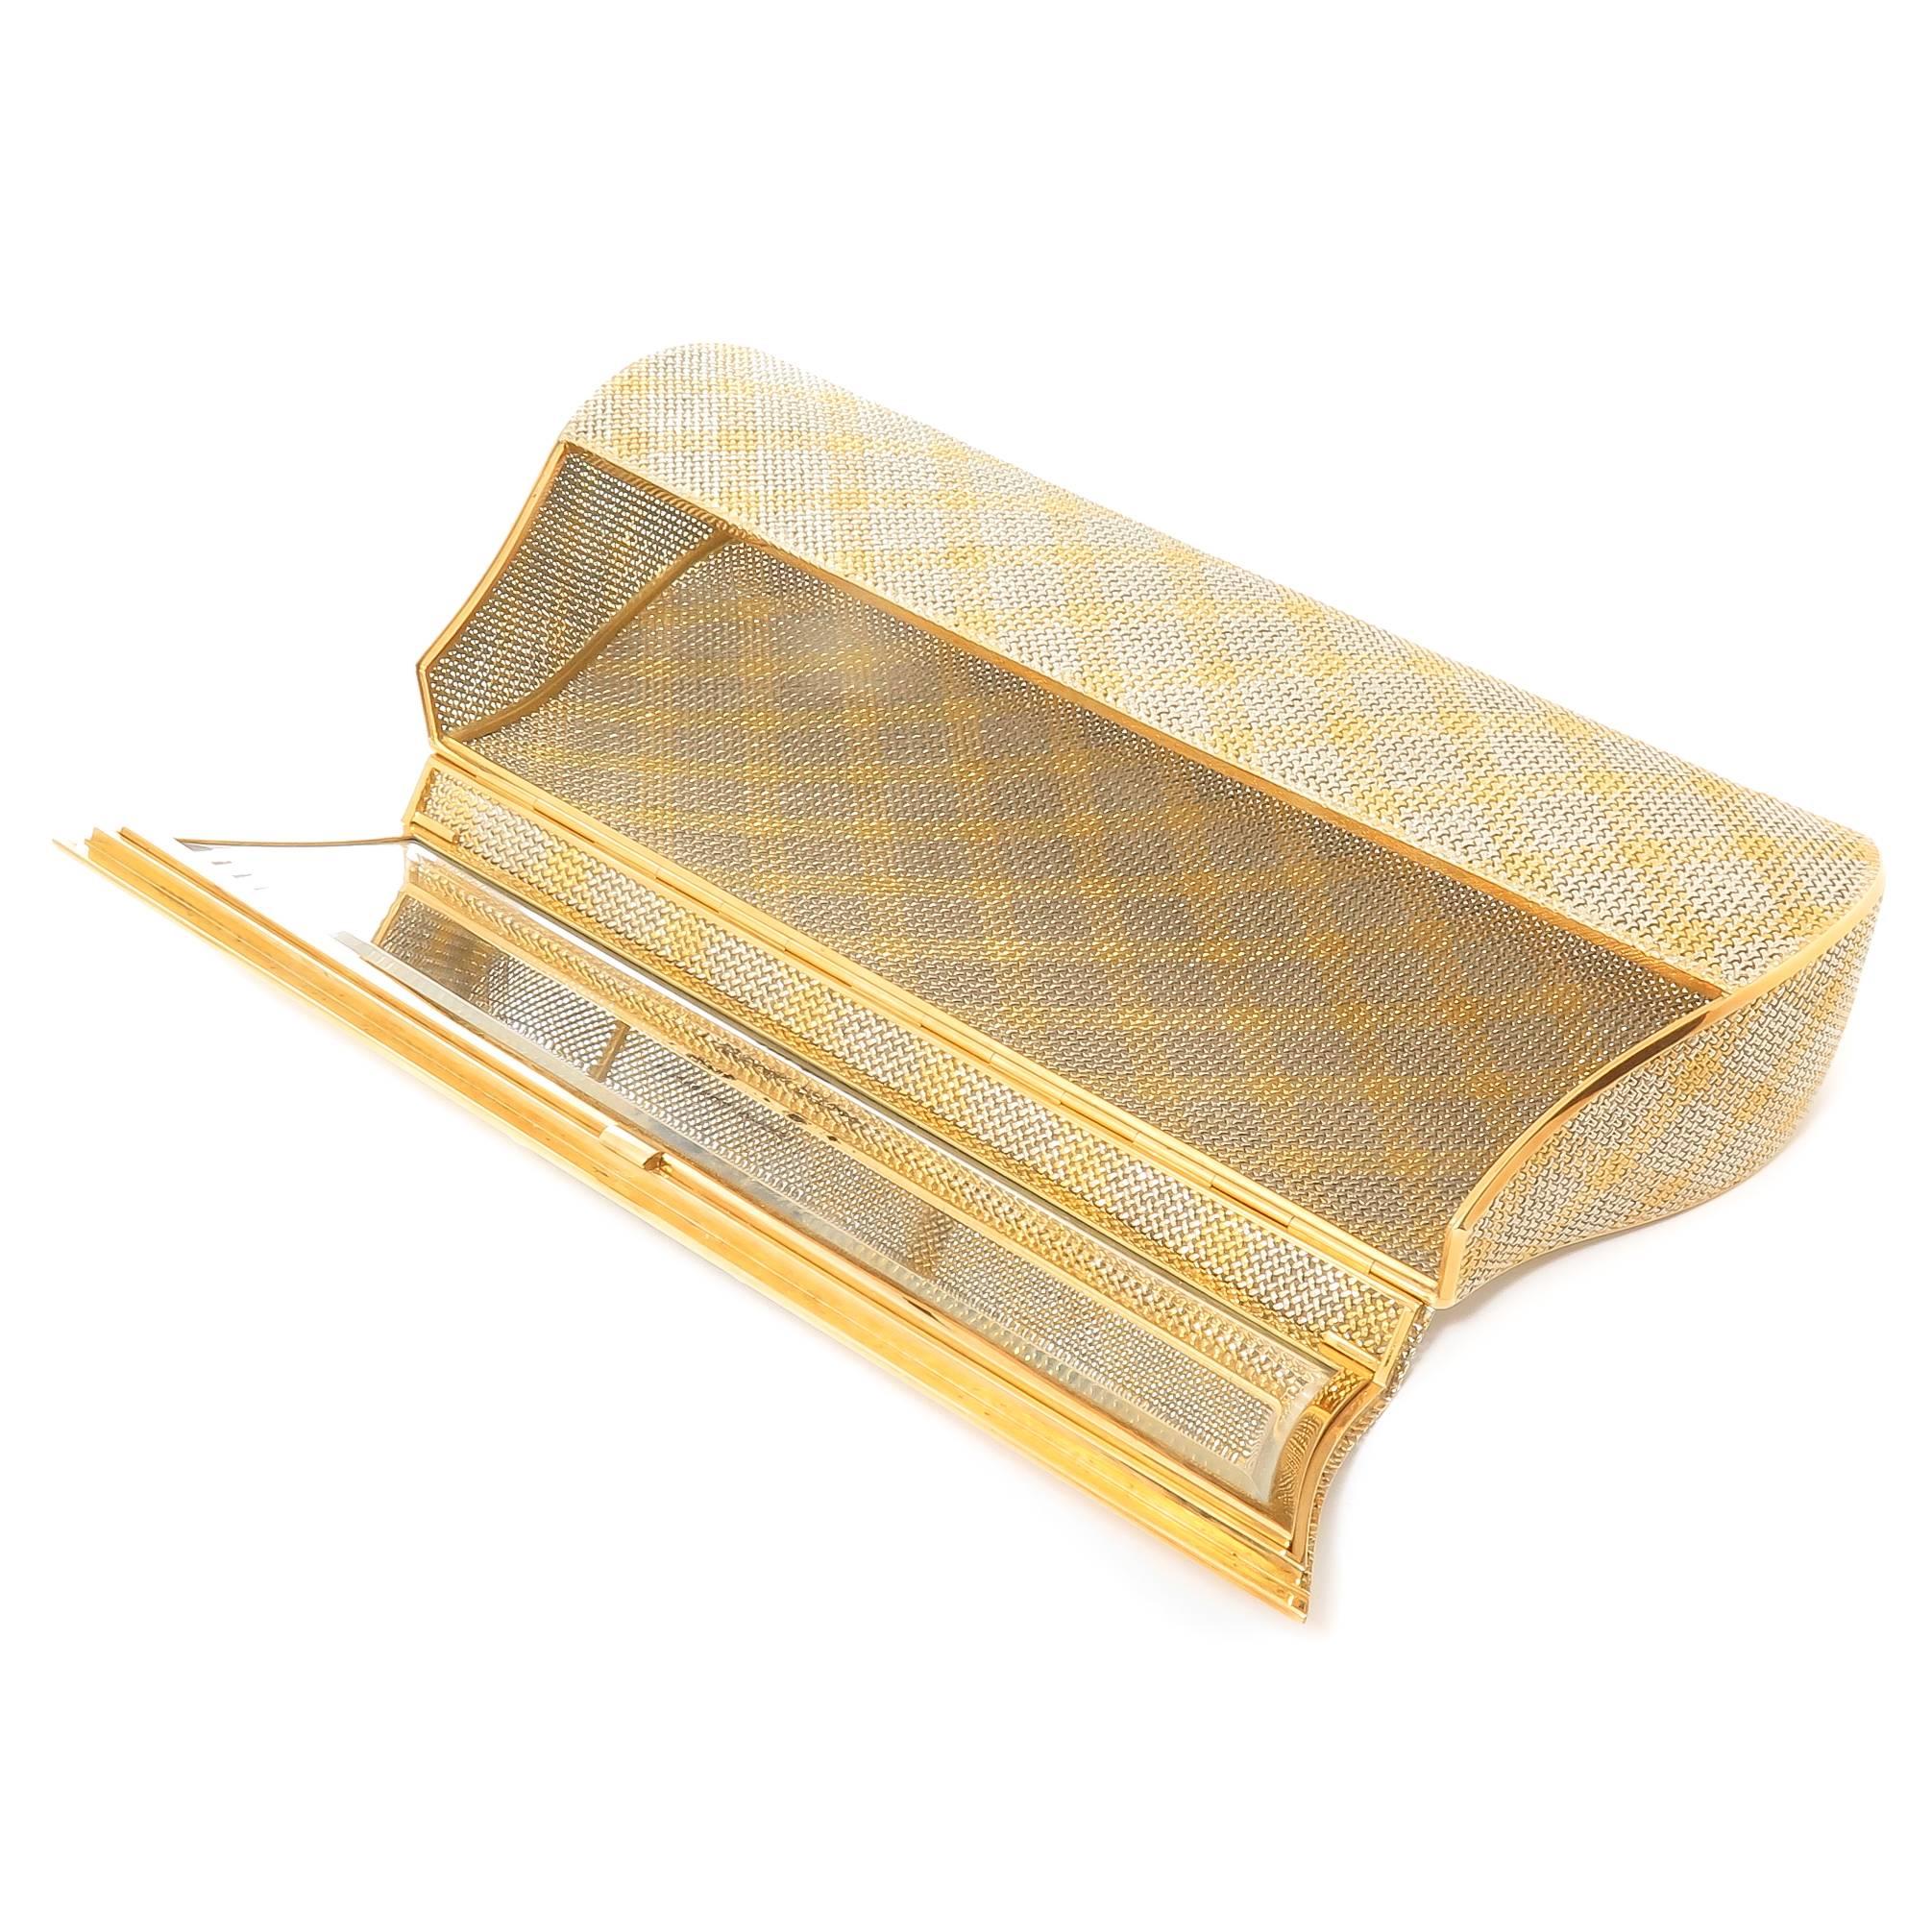 Circa 1980s Bulgari 18K Yellow and White Gold Woven Evening Clutch Bag, measuring 7 5/8 inch in length 3 1/2 inch in height and 1 1/2 inch wide. Having a Mirror inside the lid, the interior is very spacious. Weighing 371 Grams. Signed, Numbered and